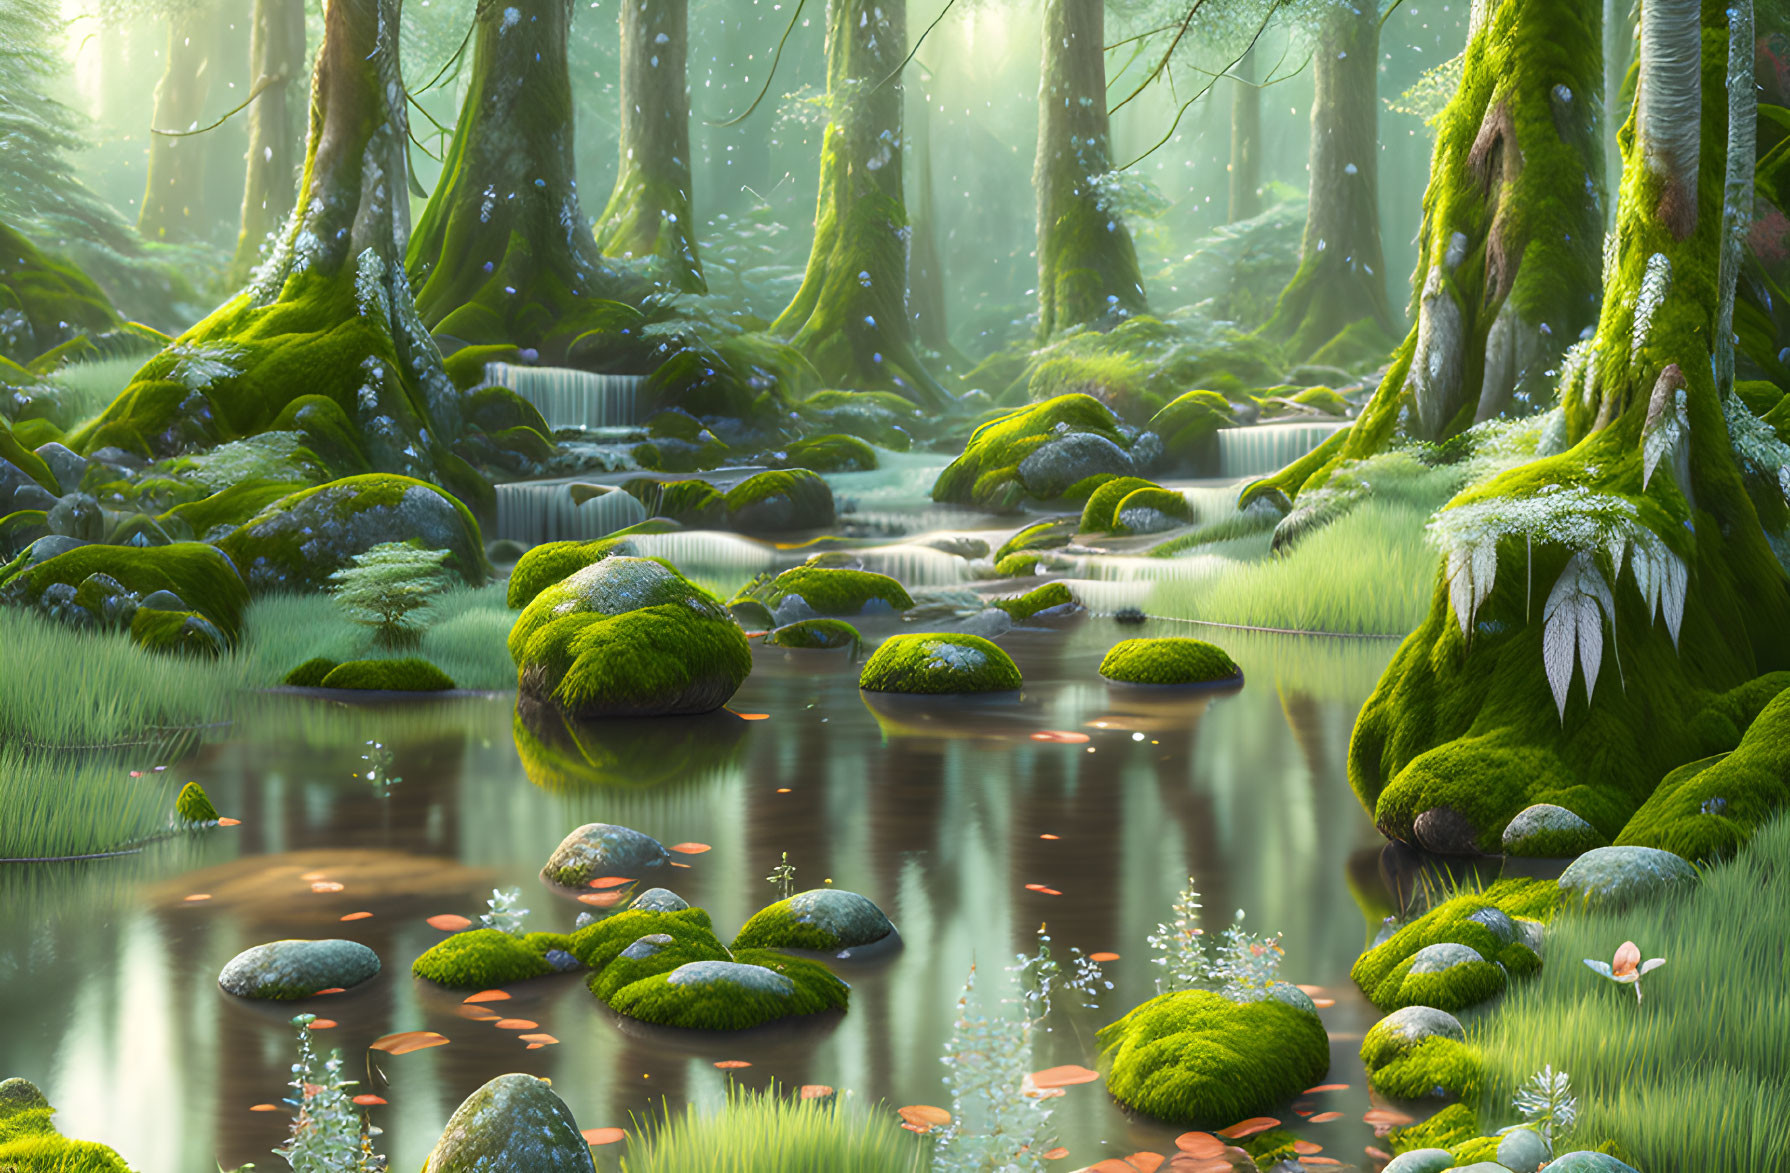 Serene Enchanted Forest with Moss-Covered Rocks and Pink Flowers